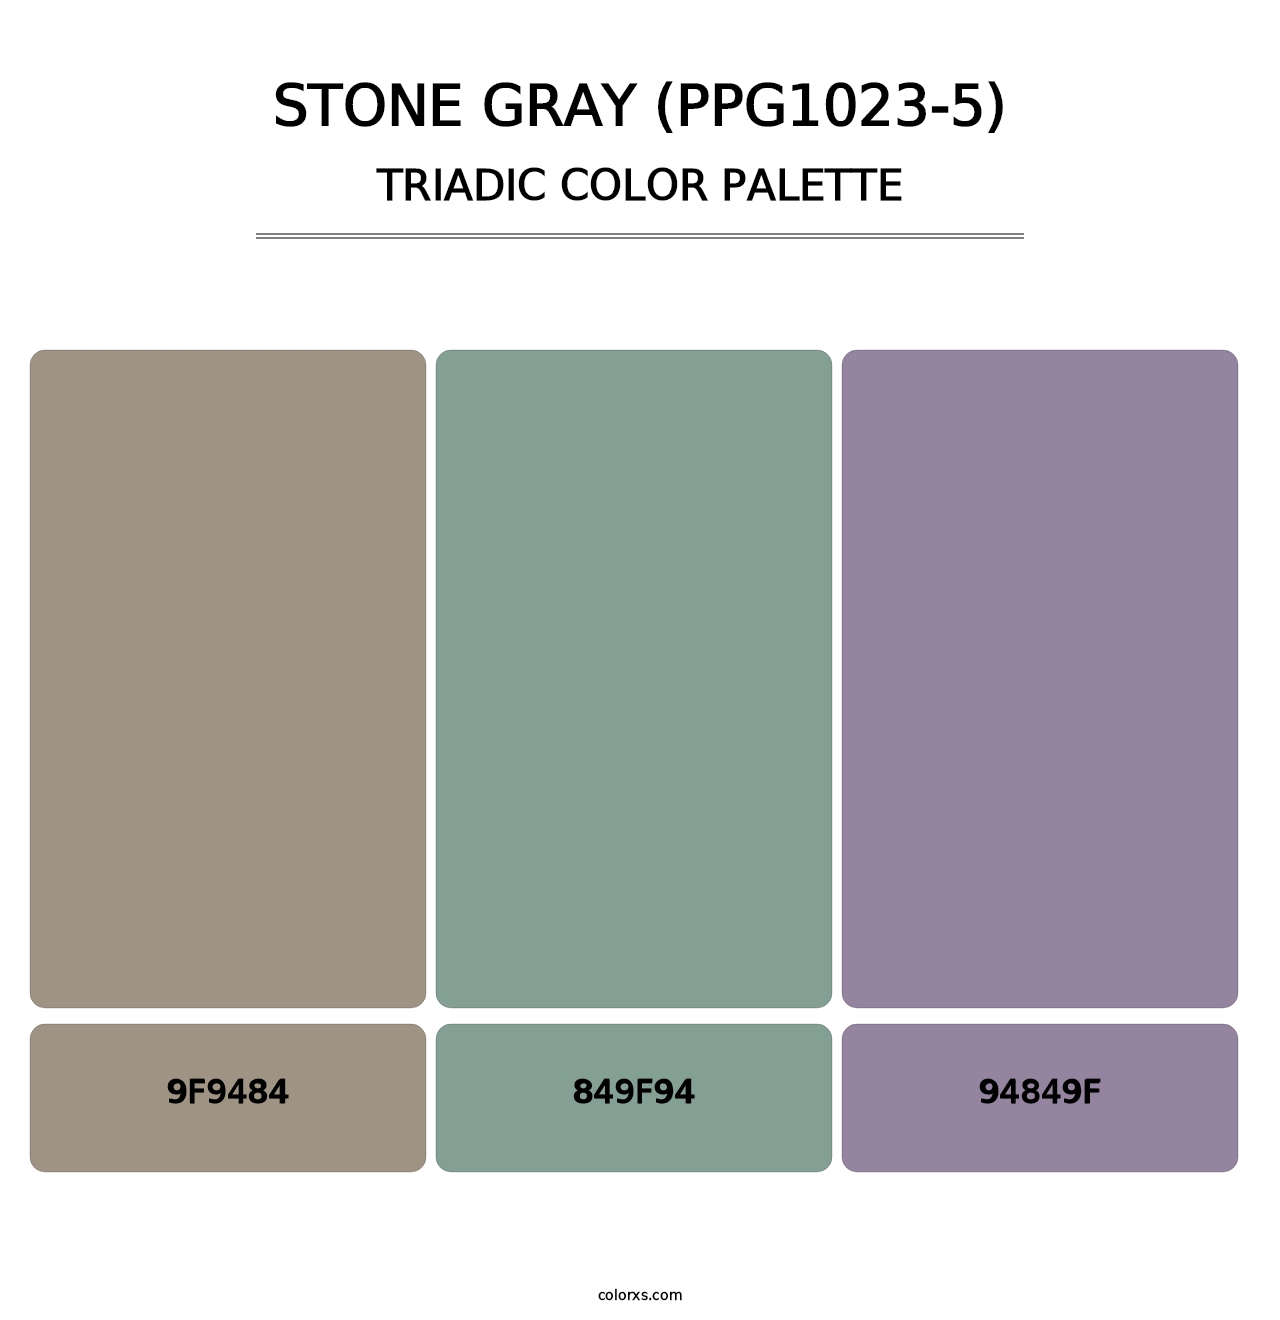 Stone Gray (PPG1023-5) - Triadic Color Palette